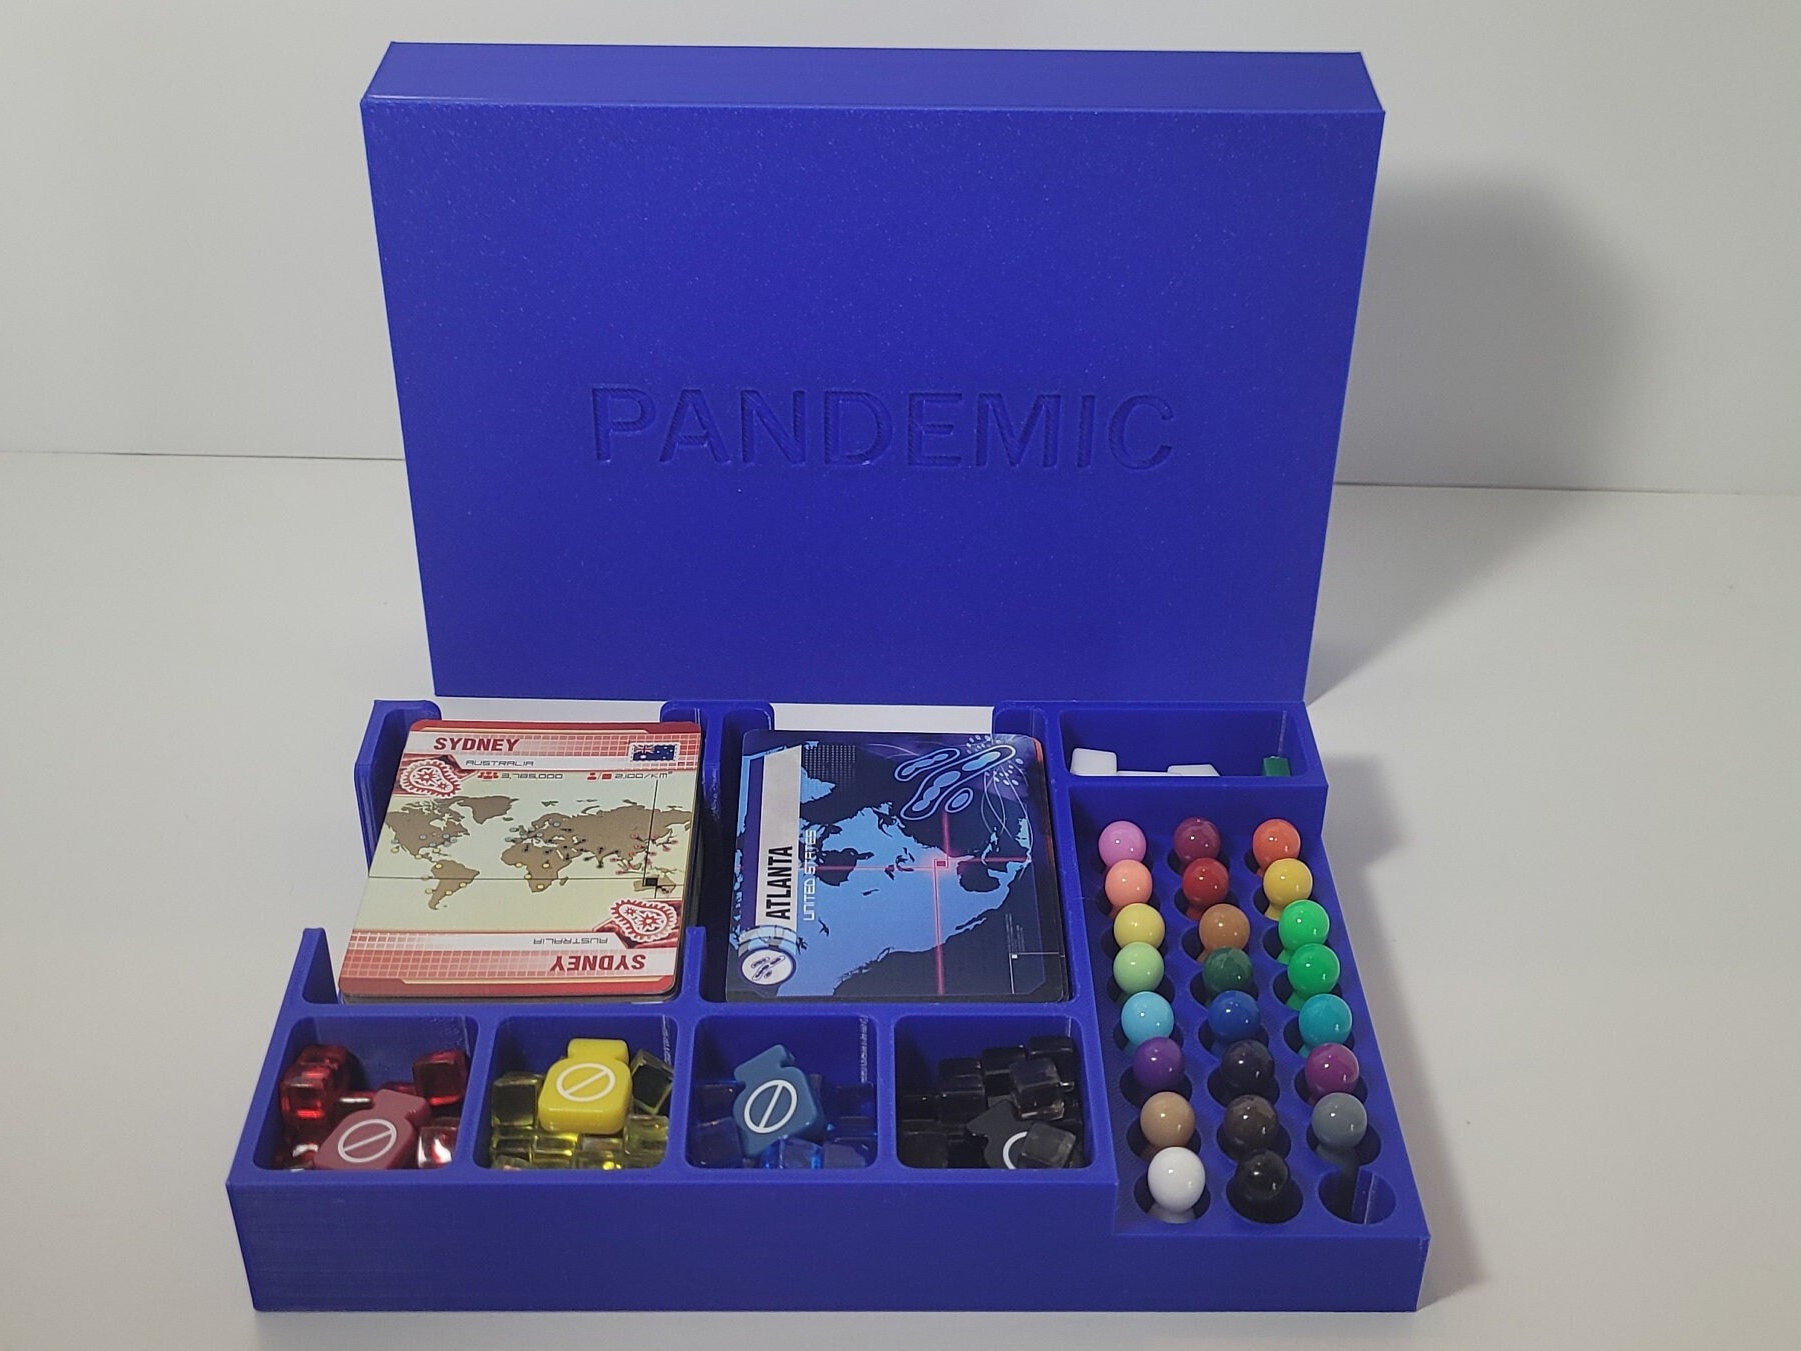  Storage Bins for Pandemic Board Game Disease Cubes, Fits in  Original Board Game Box, Use During Game Play to Organize Game Board